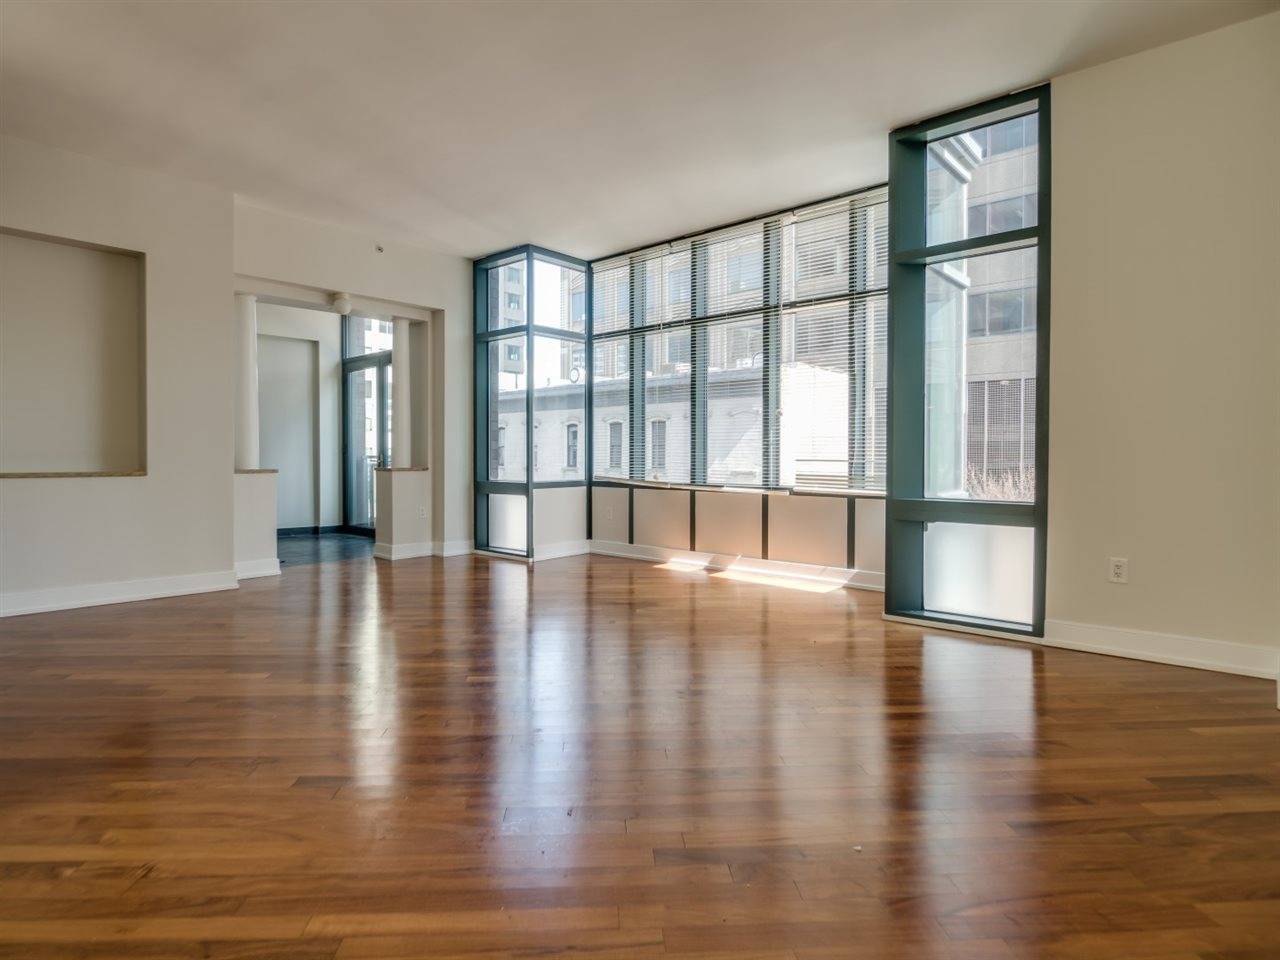 Looking for one of Jersey City's most special loft residences in an amazing waterfront location